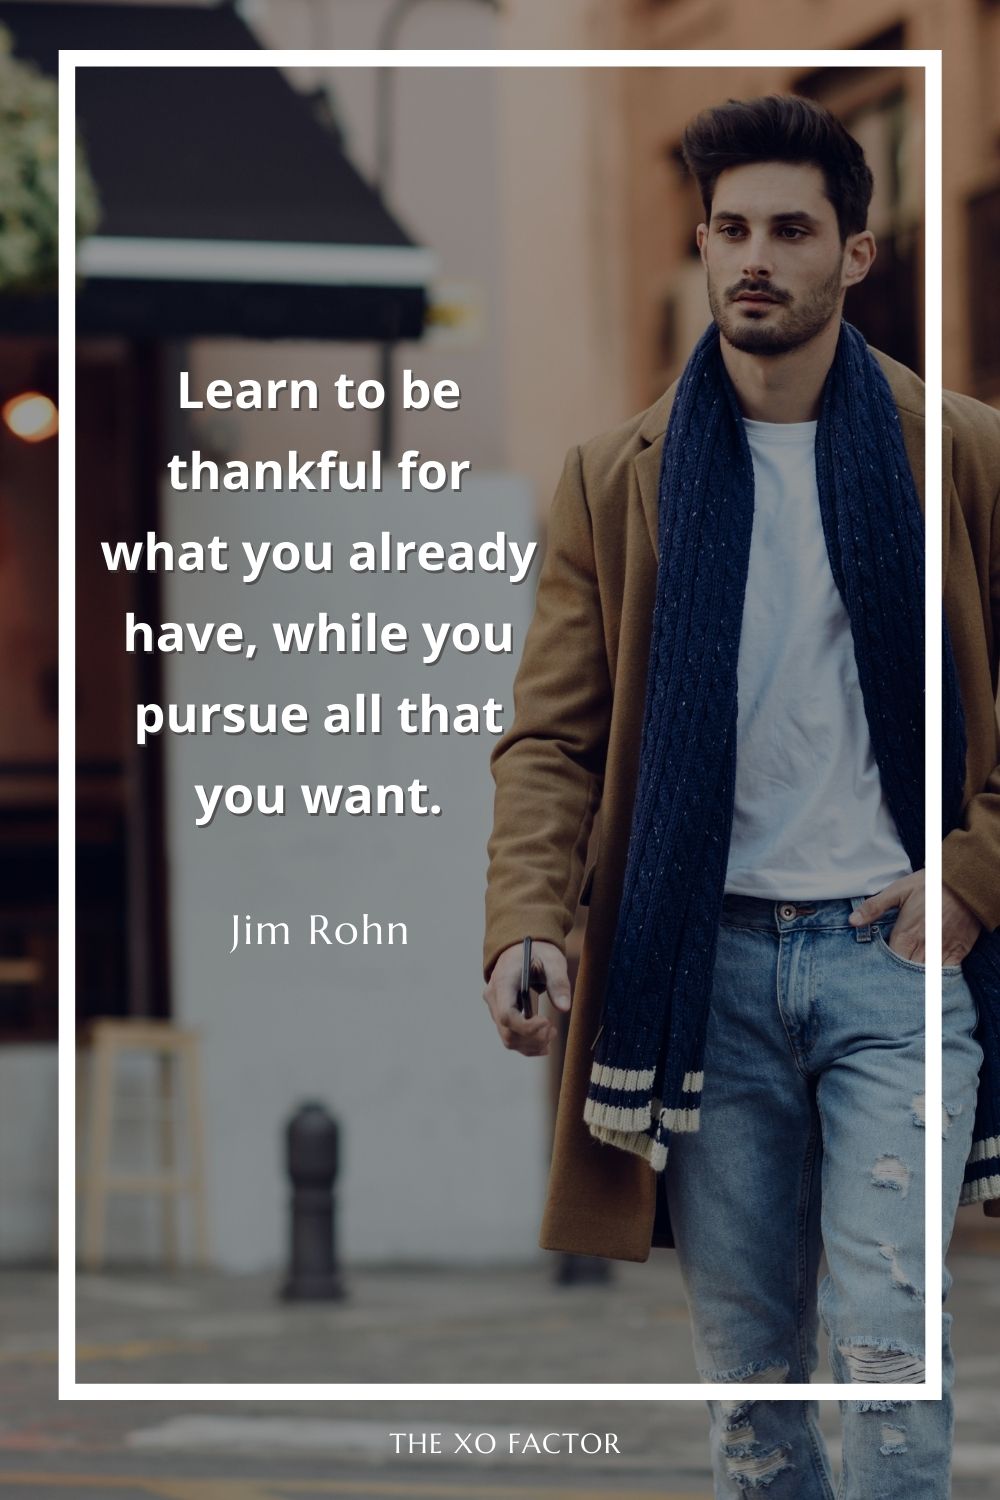 Learn to be thankful for what you already have, while you pursue all that you want.